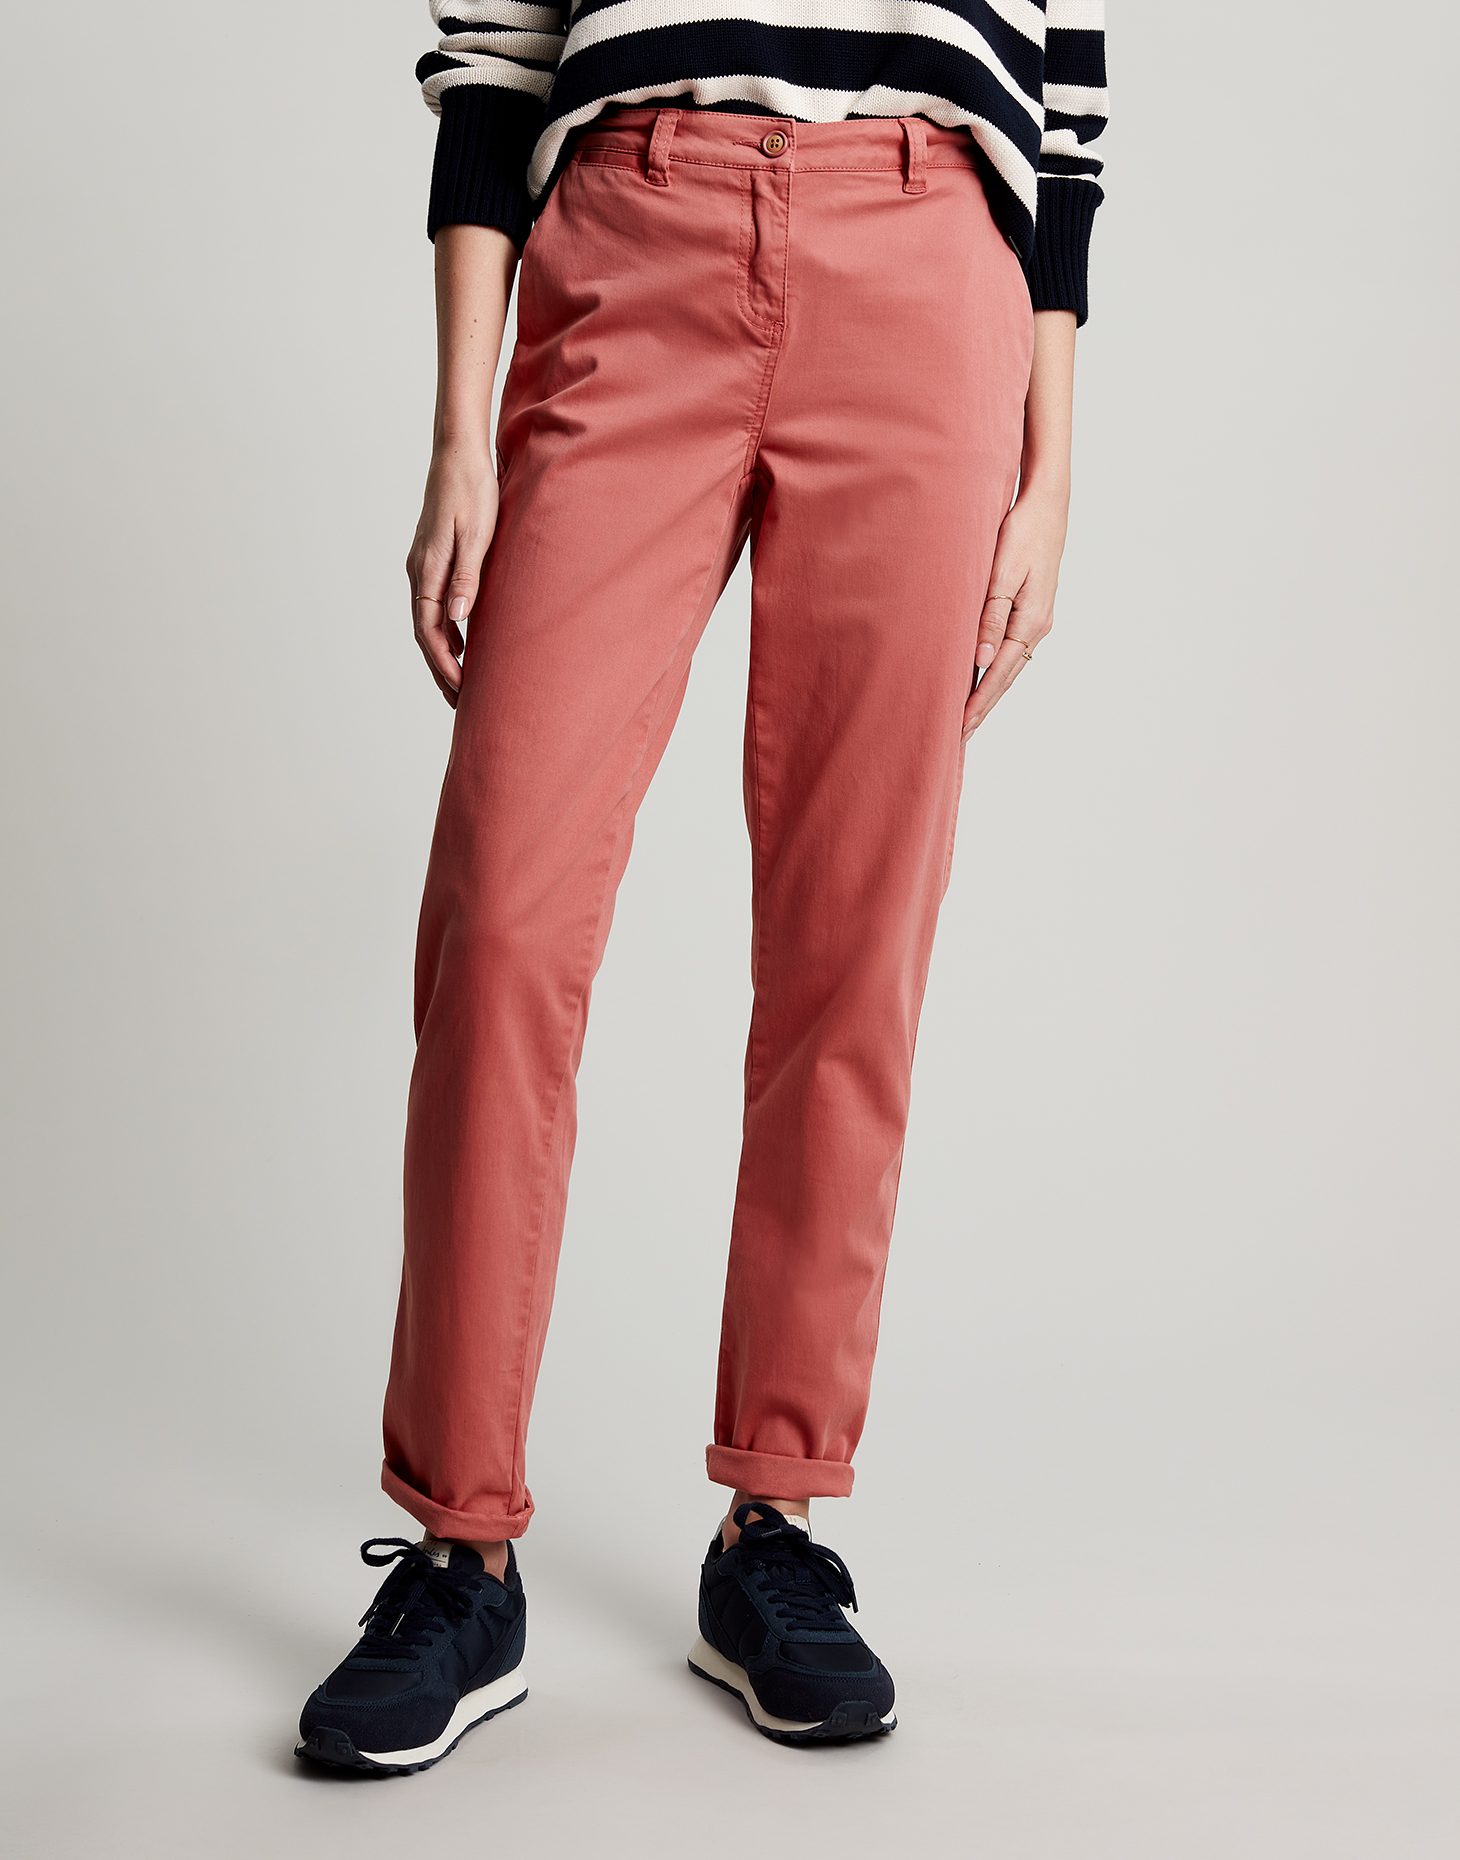 Joules Hesford Chino Dusty Pink - Shorts & Trousers - Mole Avon